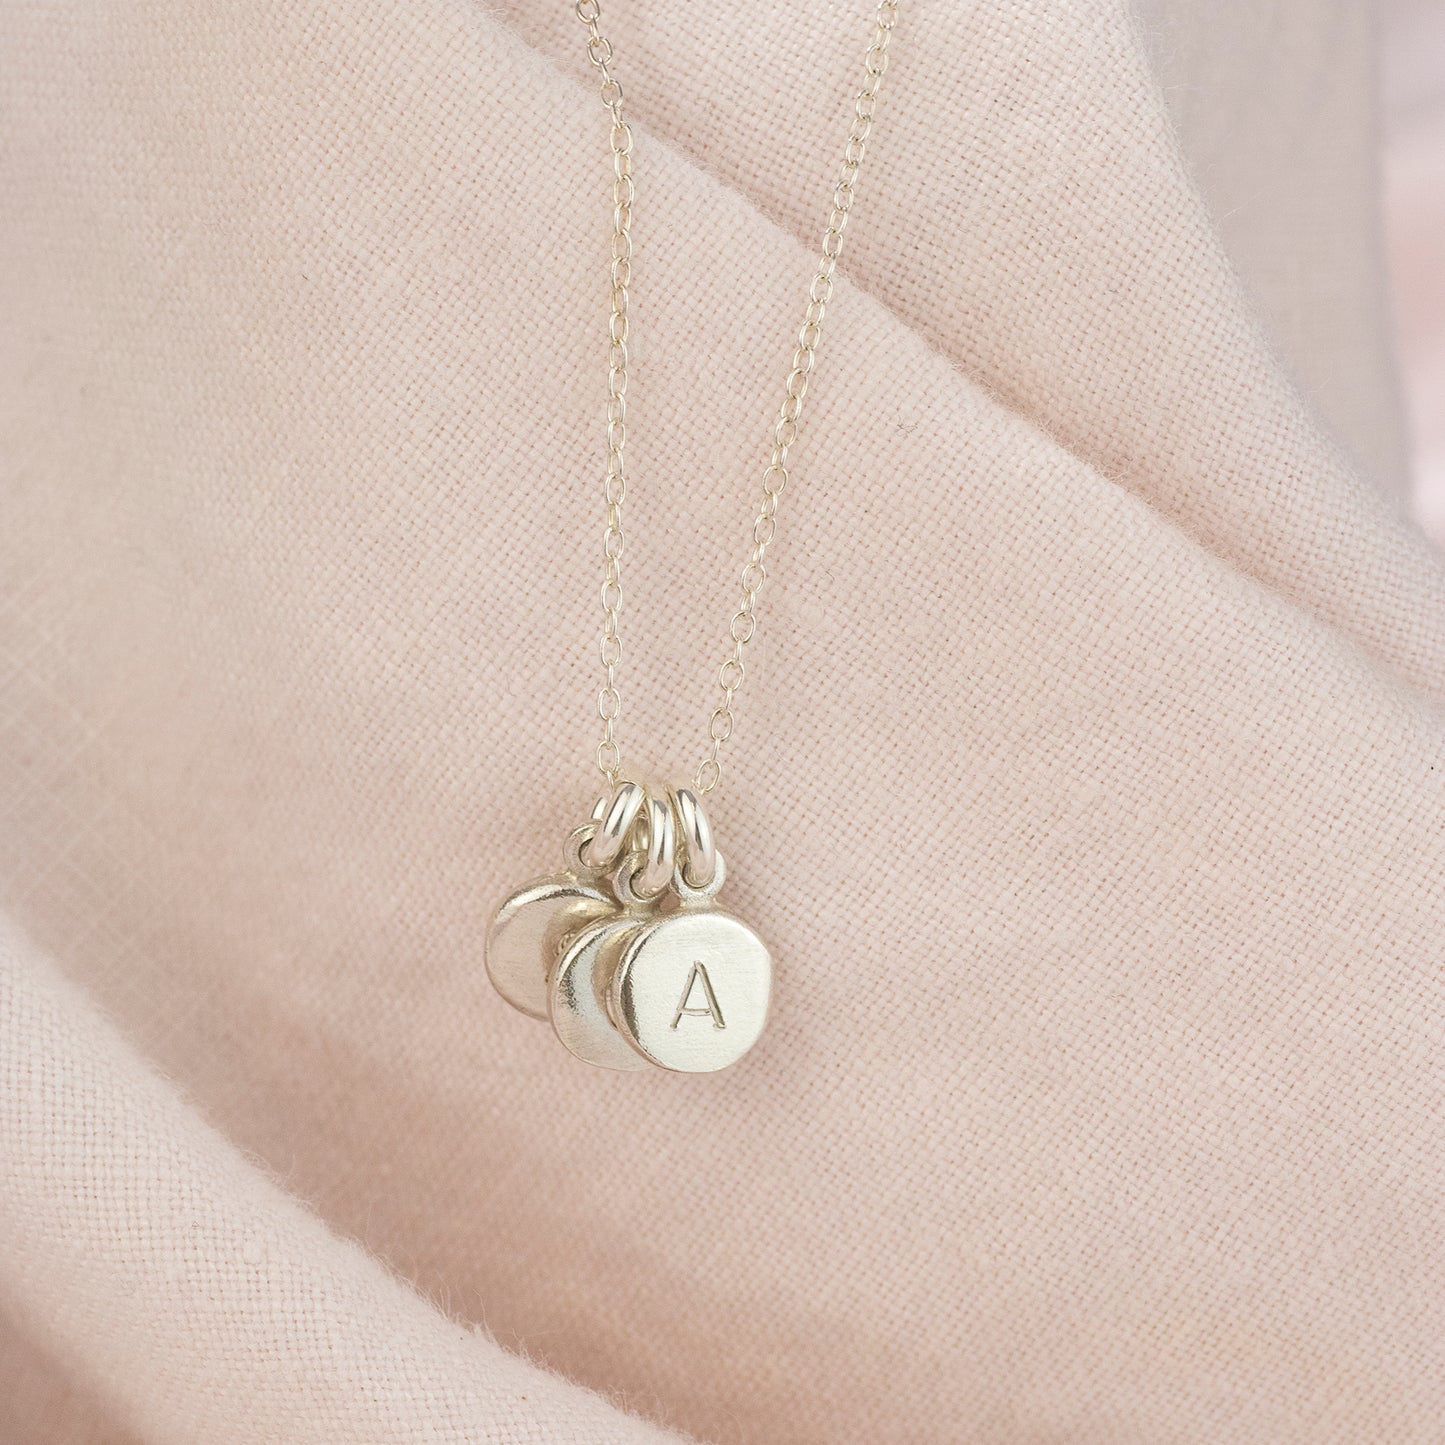 Personalised Family Initials Necklace